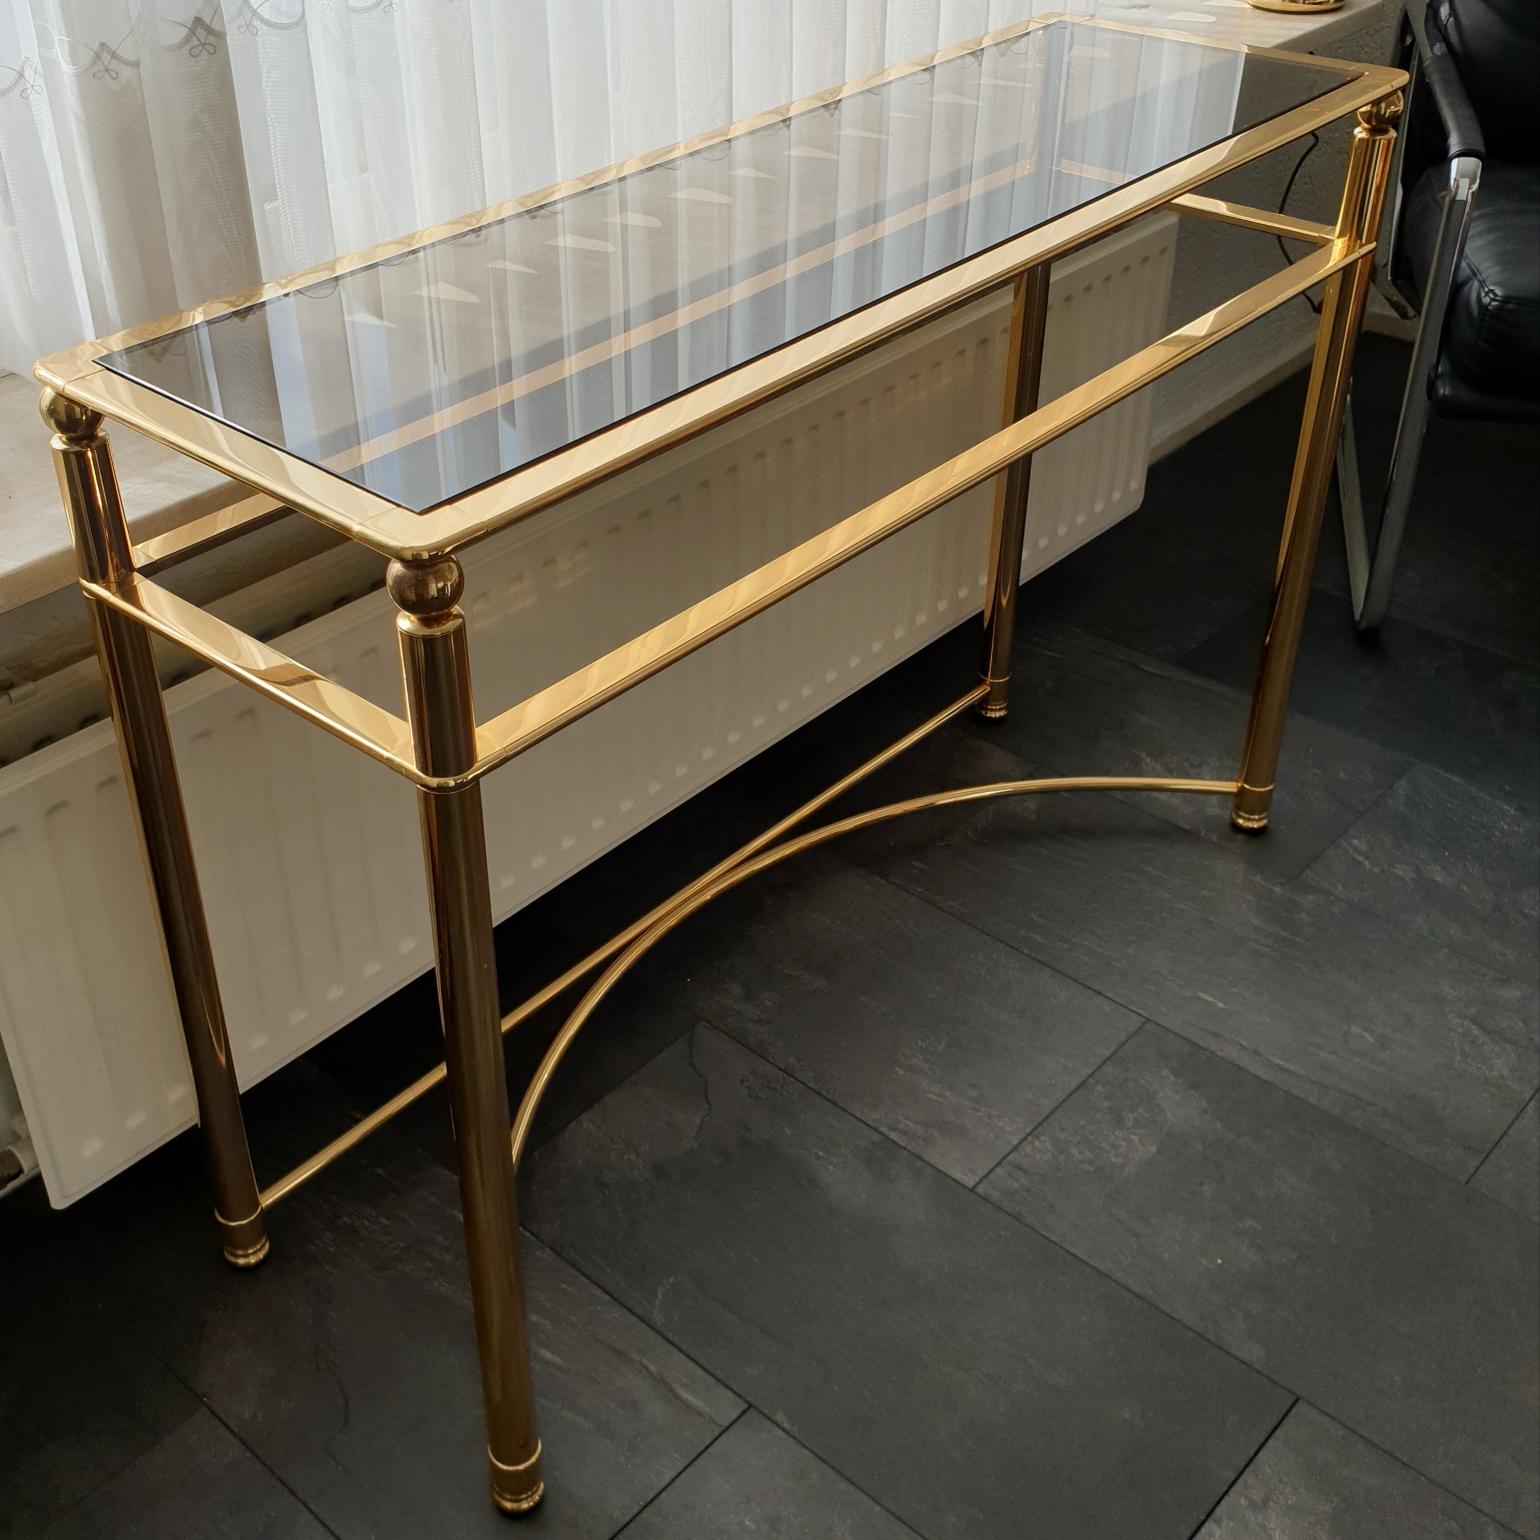 Gold-plated console table with smoked cut glass, 1980s
Heavy quality.
Hollywood Regency style.